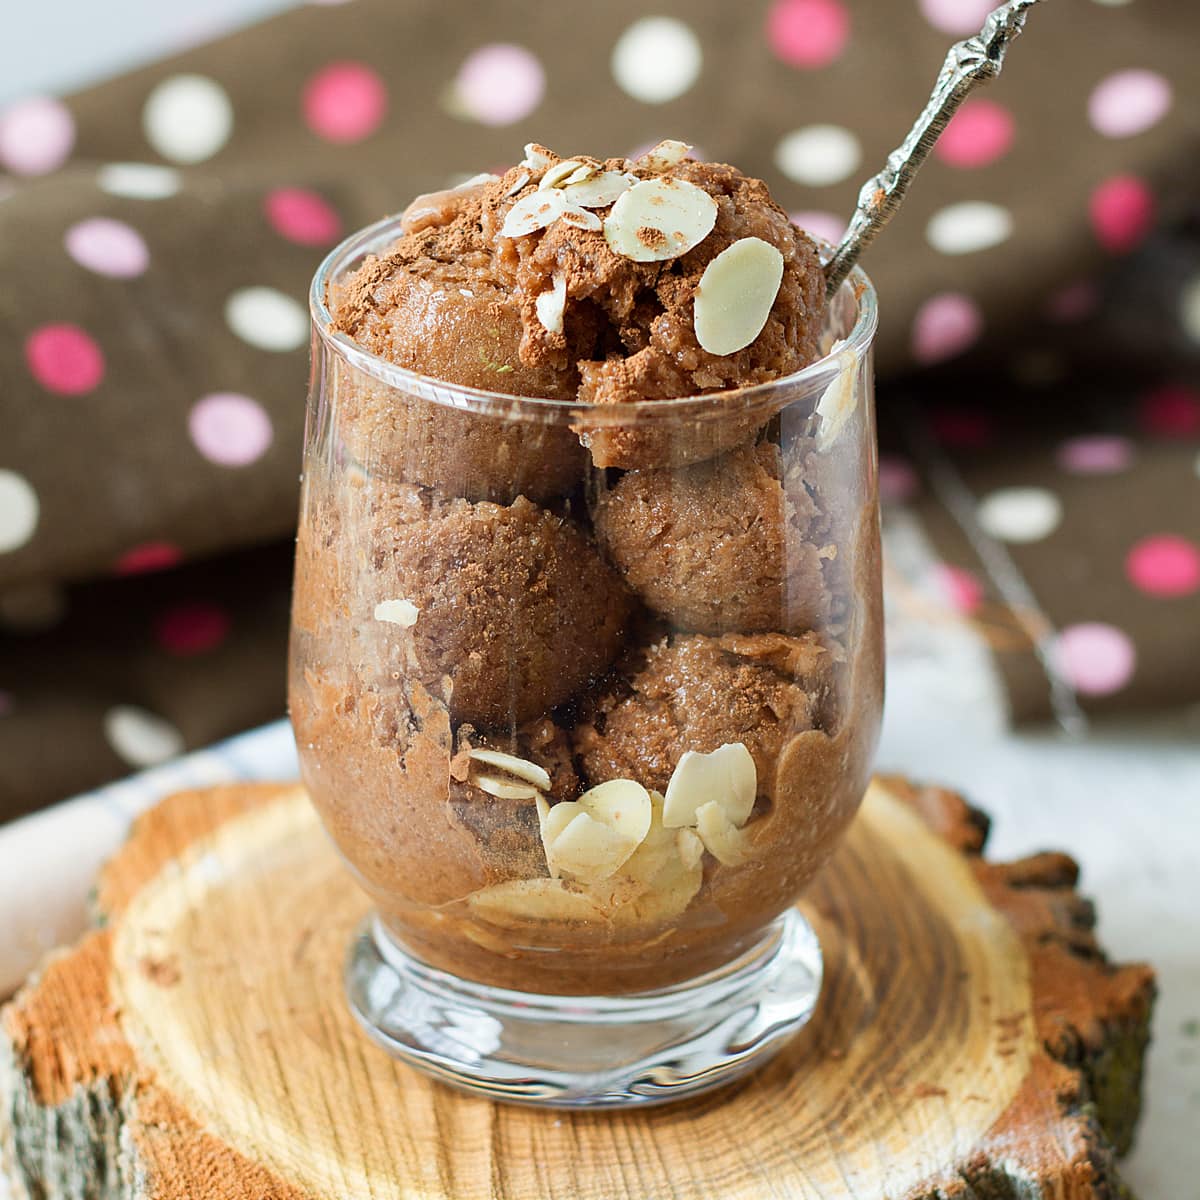 Almond milk chocolate banana ice cream in a cup with sliced almonds.